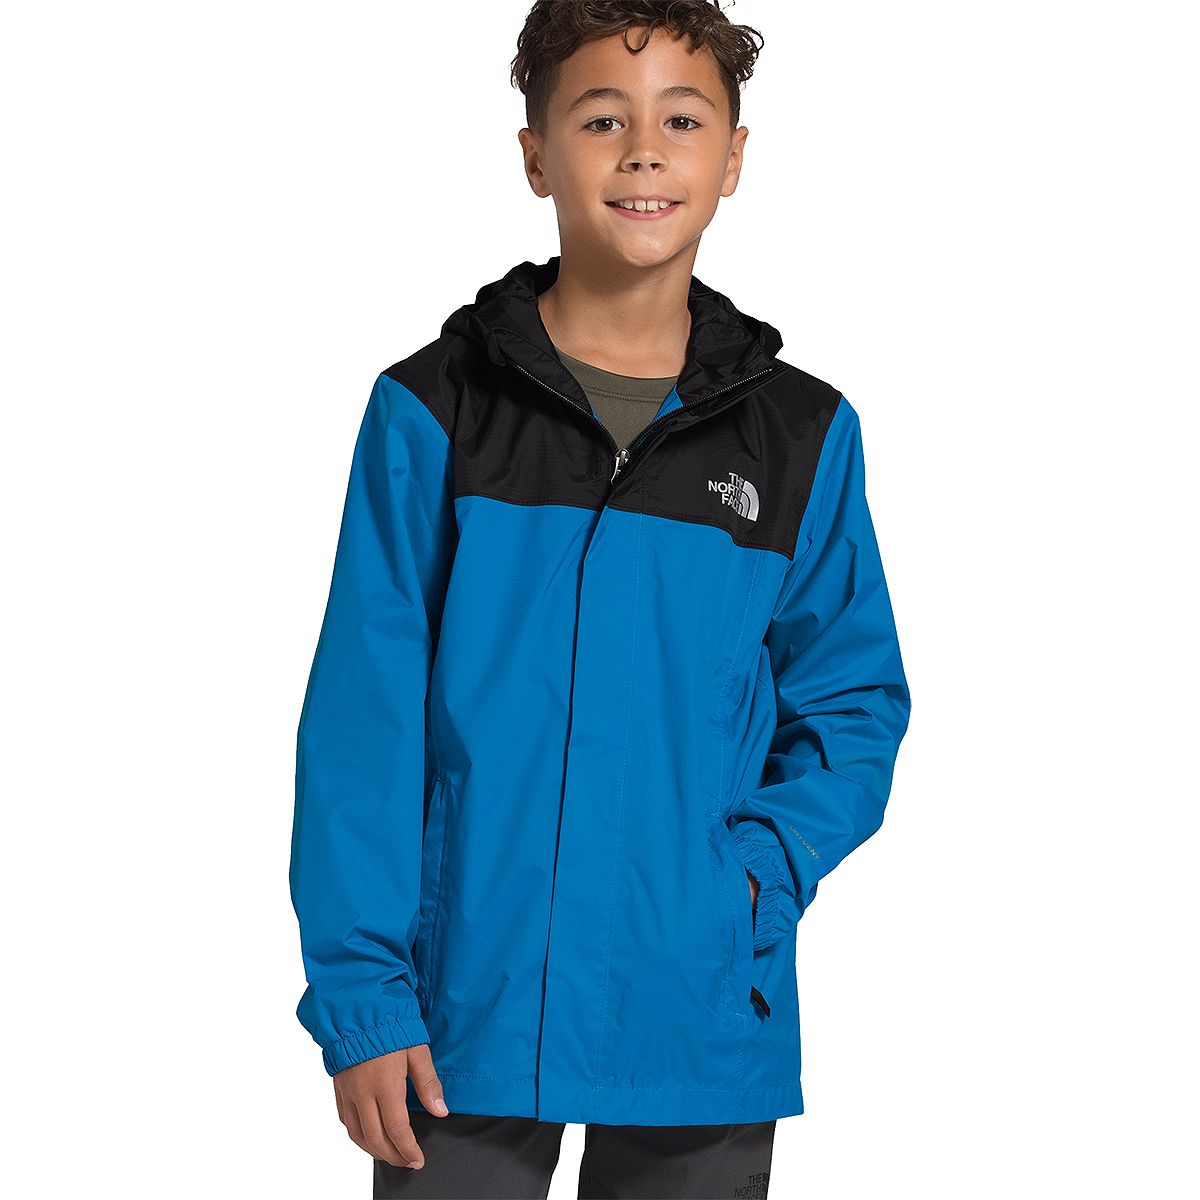 The North Face Resolve Reflective Hooded Jacket - Boys' | Backcountry.com